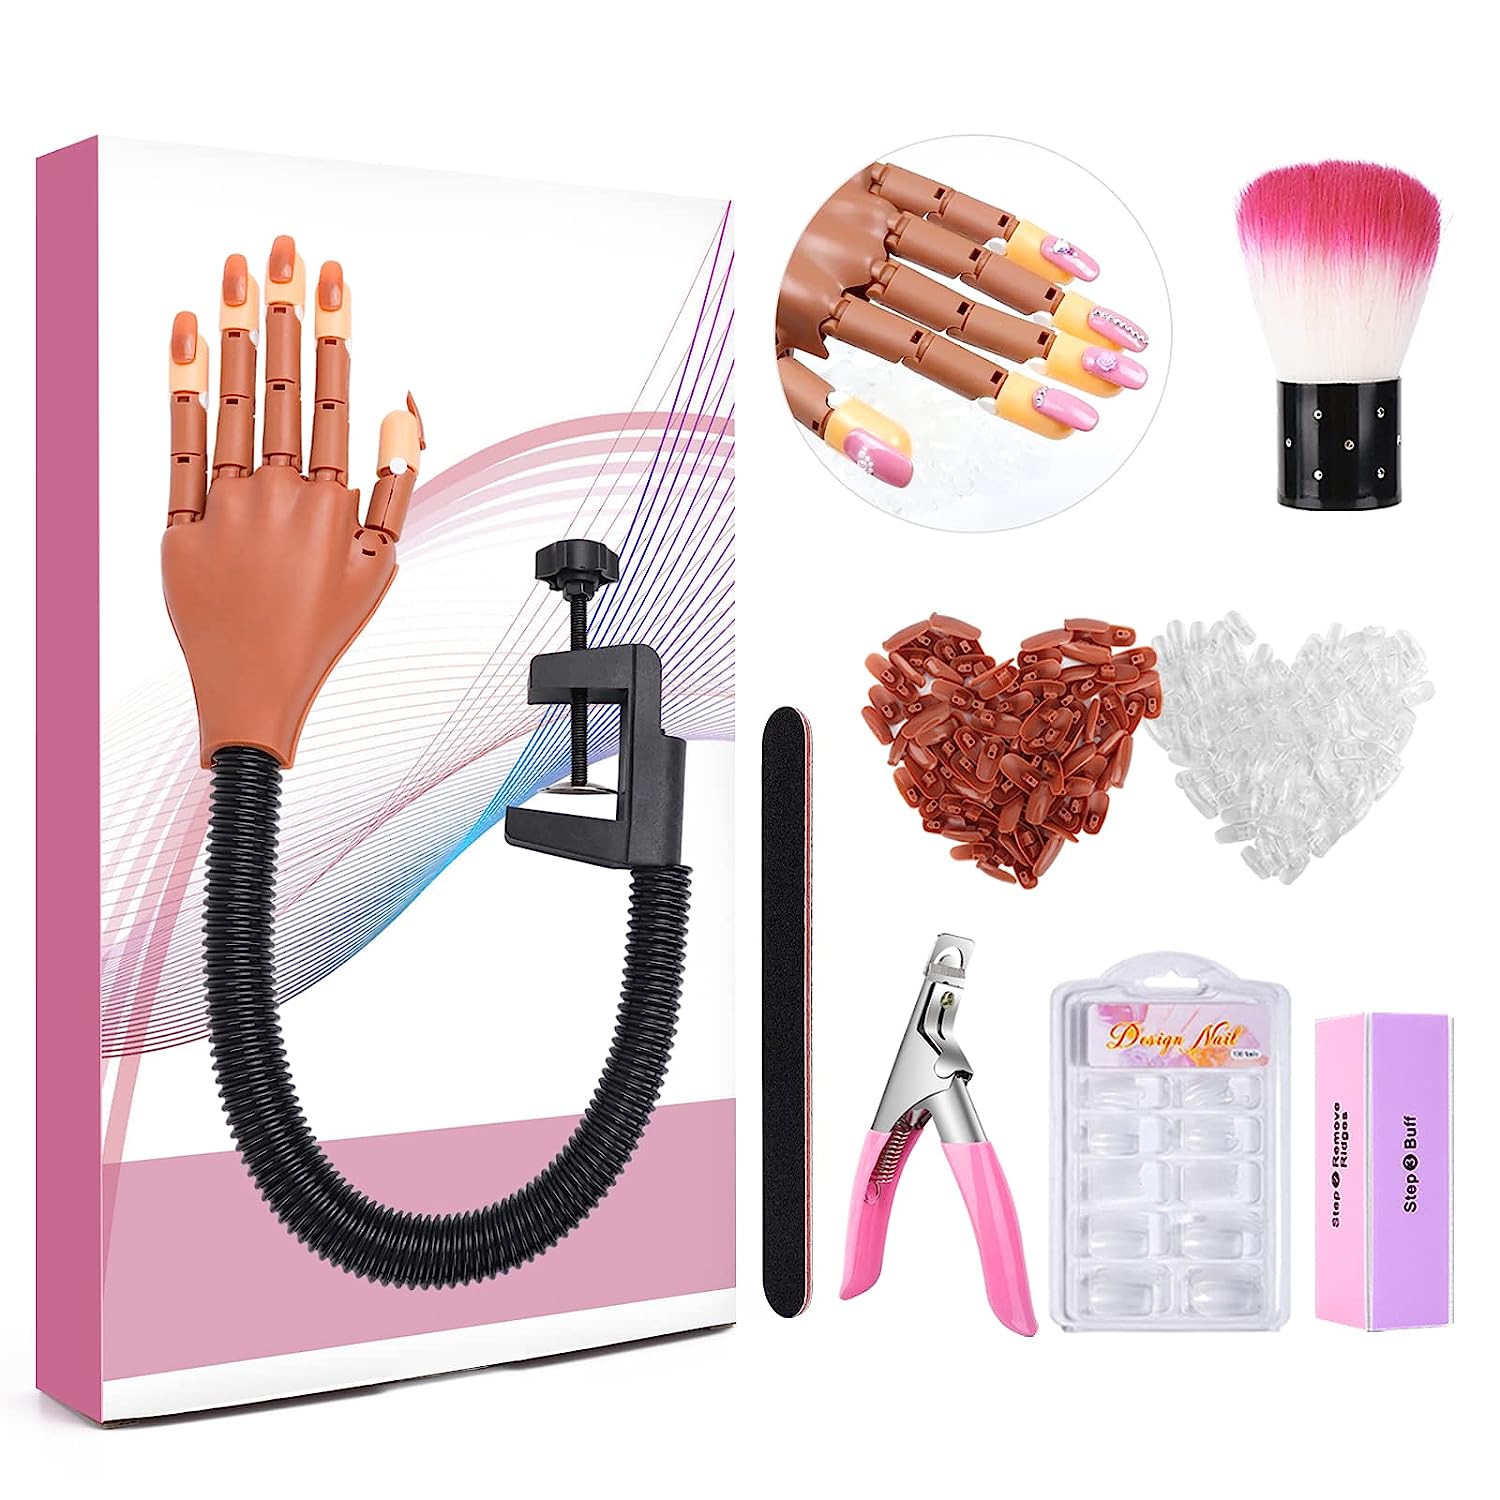 Practice Hand for Acrylic Nails, Fake Hand for Nails Practice, Flexible  Movable Fake Hand Manicure Practice Tool, Nail Art Training Practice 